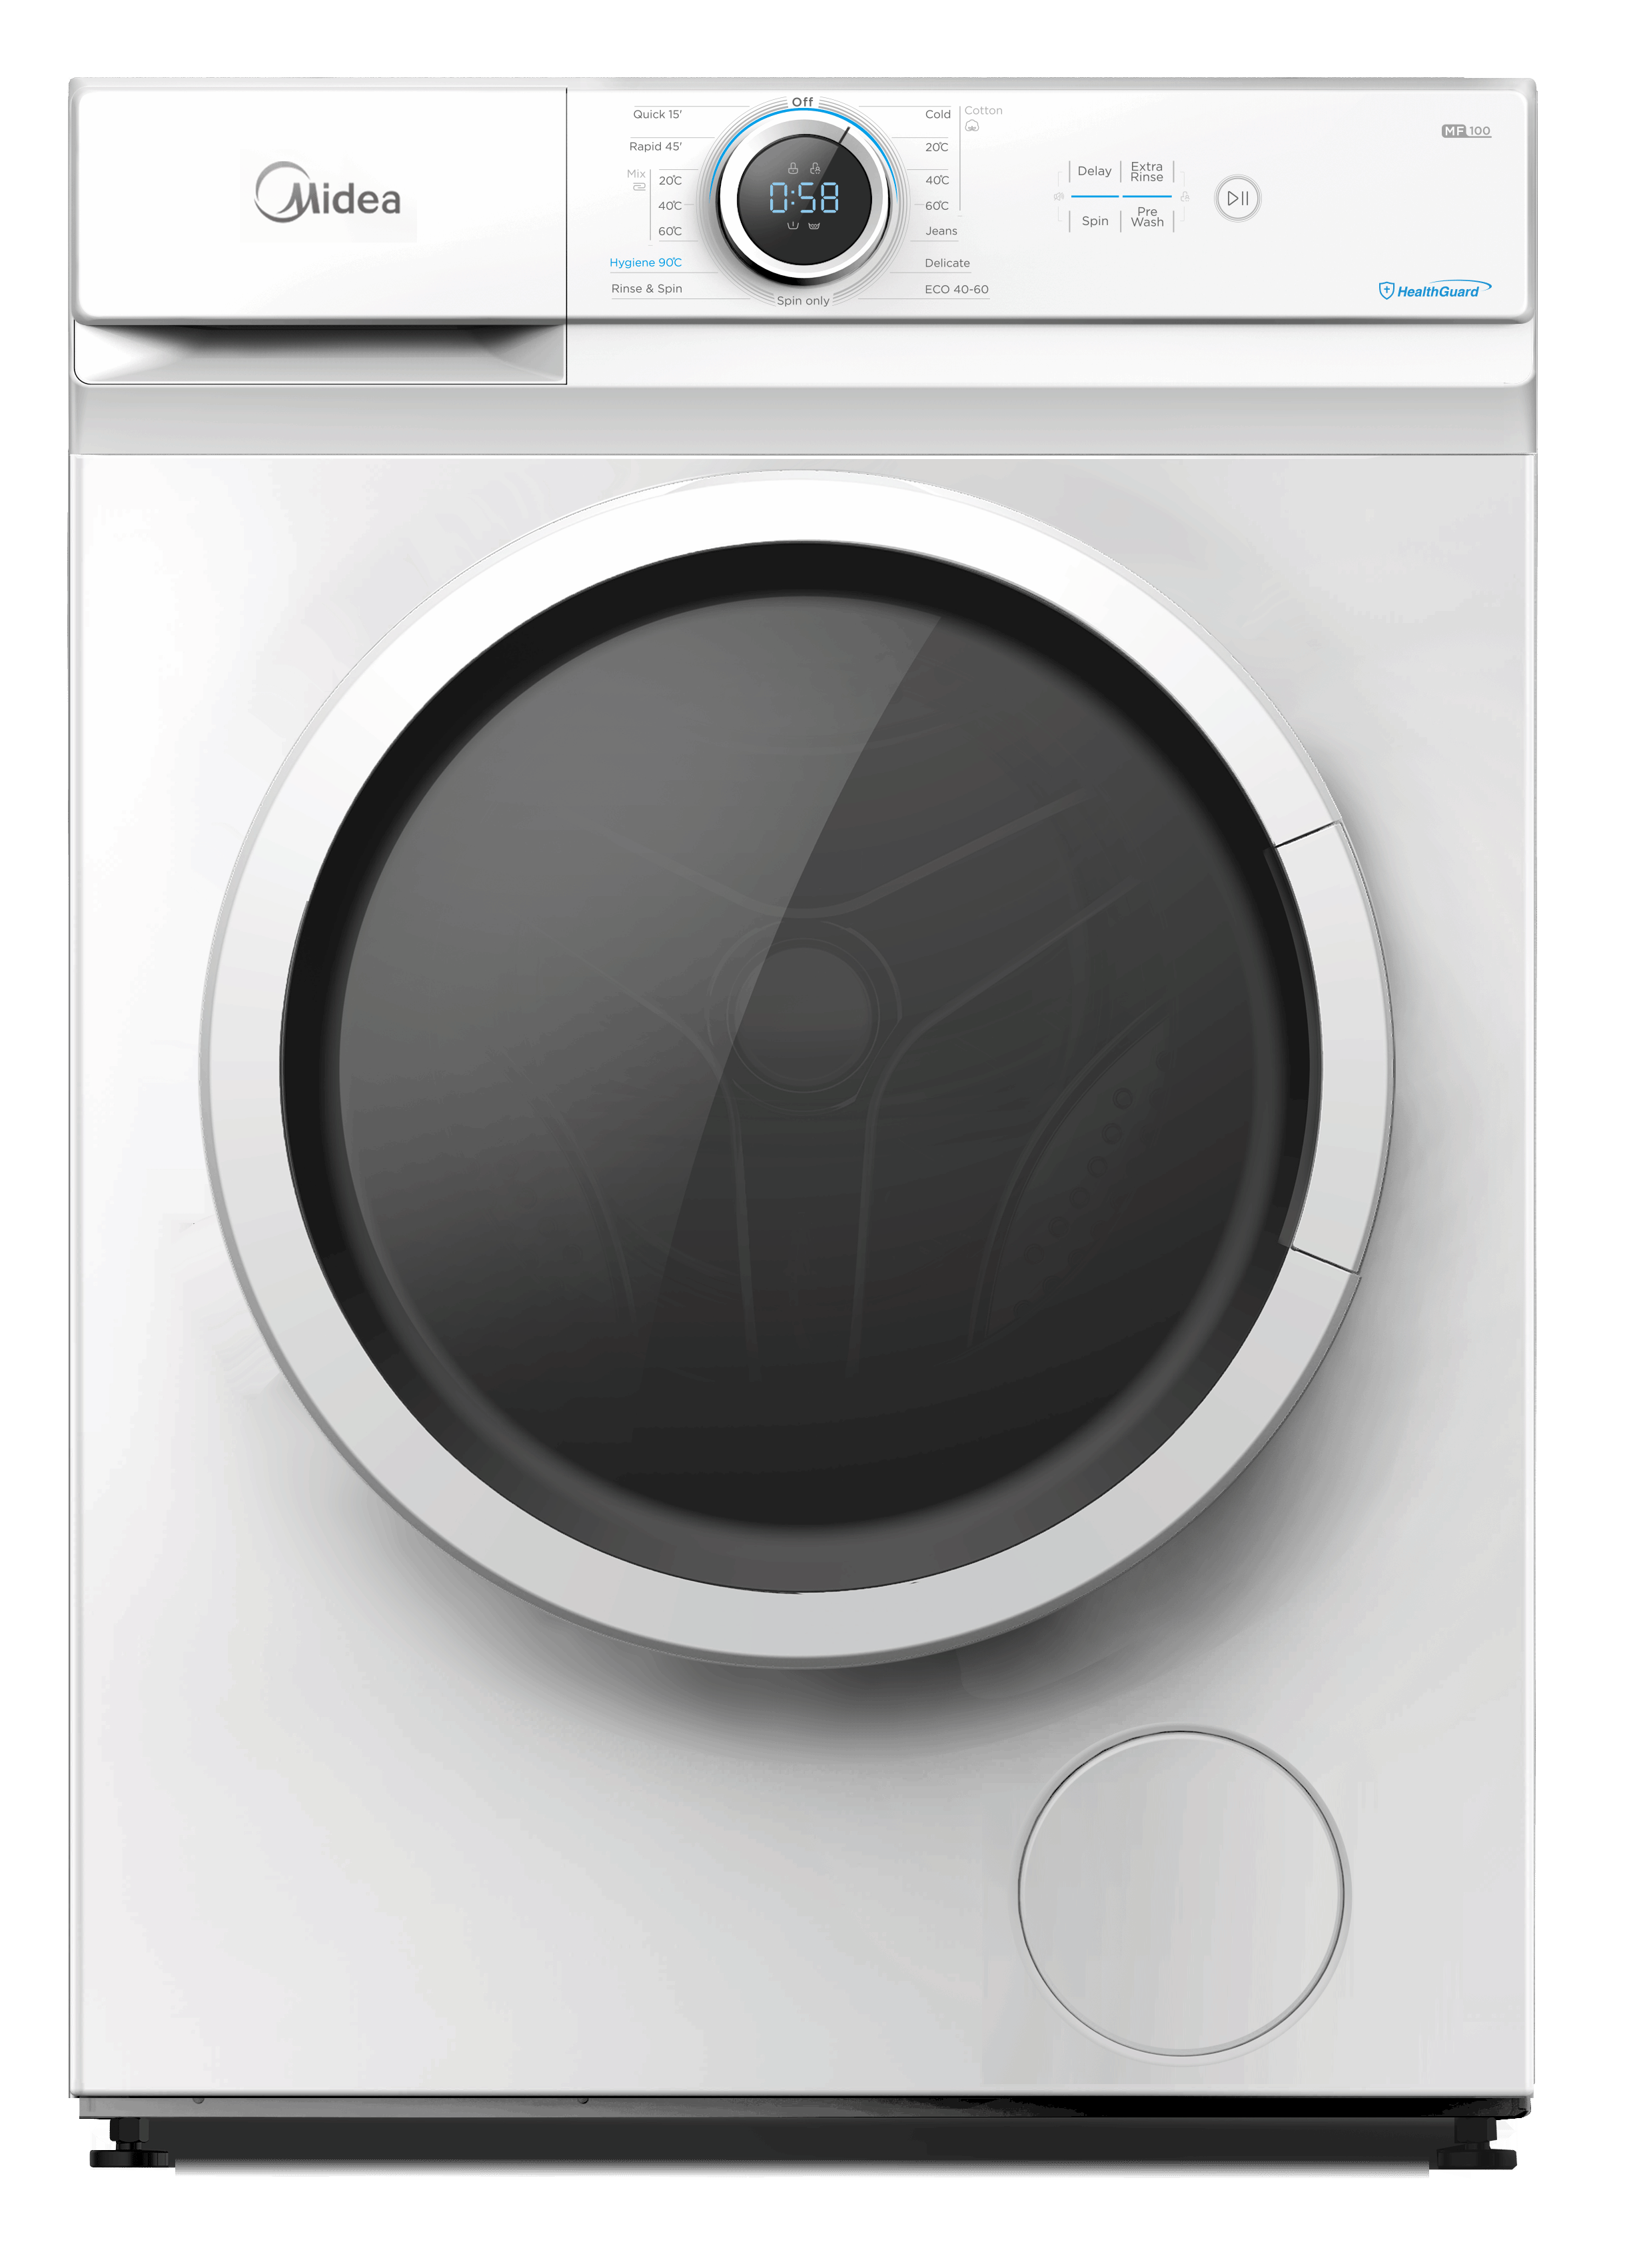 Midea MF100W70 Freestanding Washing Machine, Lunar Dial and LED Display,  1200 RPM, 7 kg Load, White [